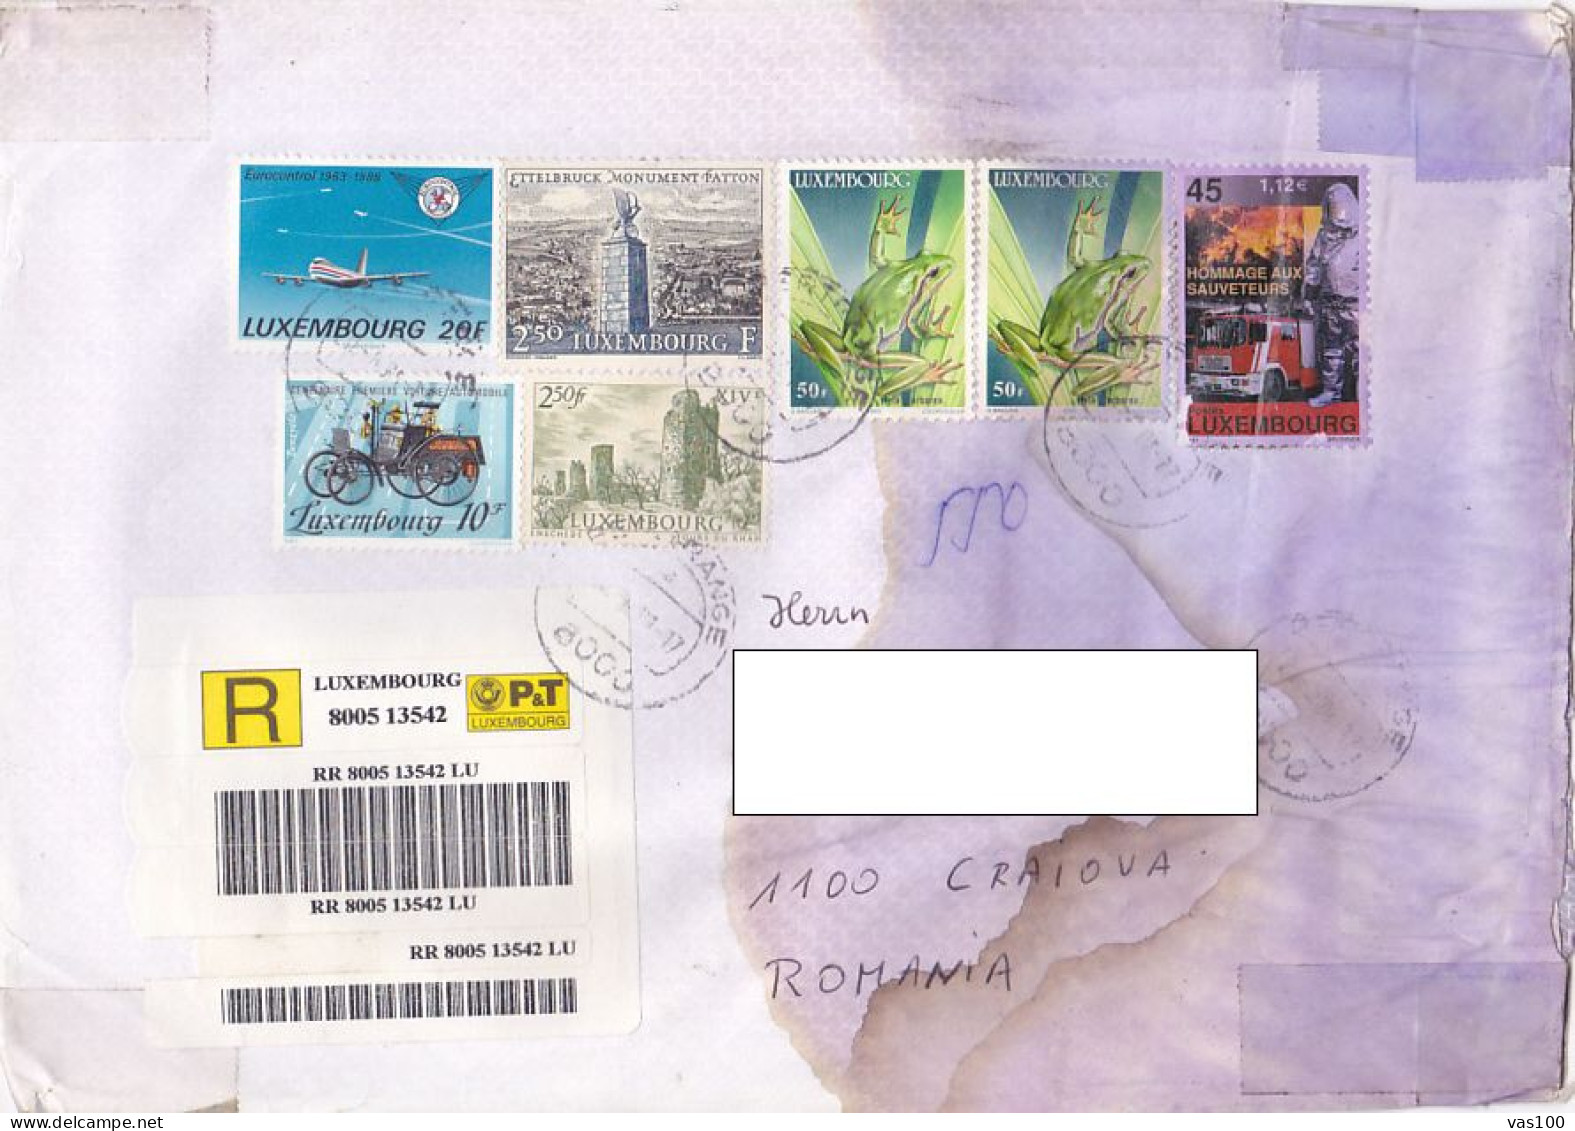 PLANE, FIRST CAR, MONUMENT, TOWER, FROG, FIREFIGHTERS, STAMPS ON REGISTERED COVER, 2001, LUXEMBOURG - Covers & Documents